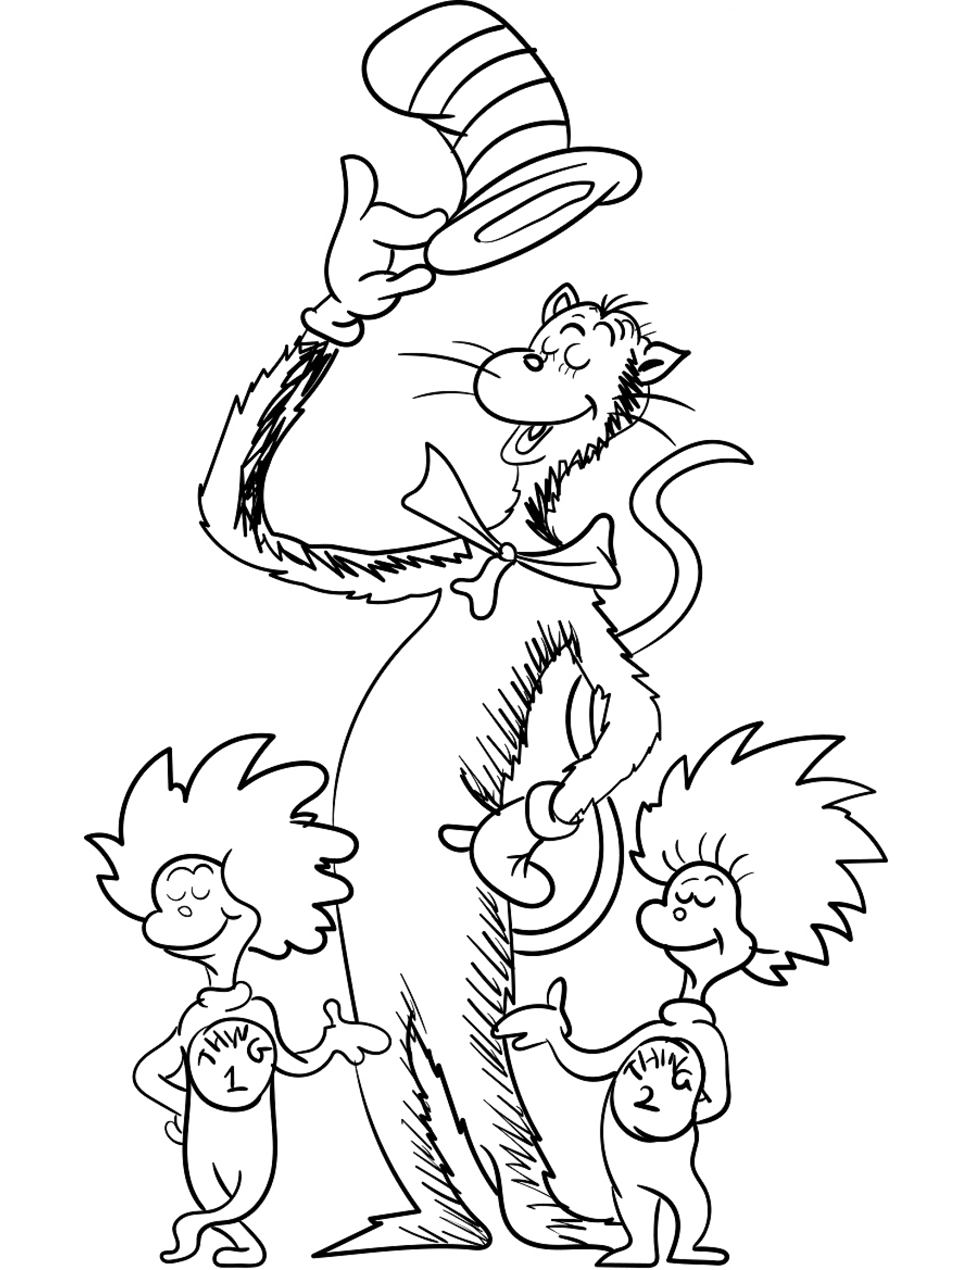 Thing 1 And Thing 2 Coloring Pages - Thing 1 And Thing 2 Coloring Page